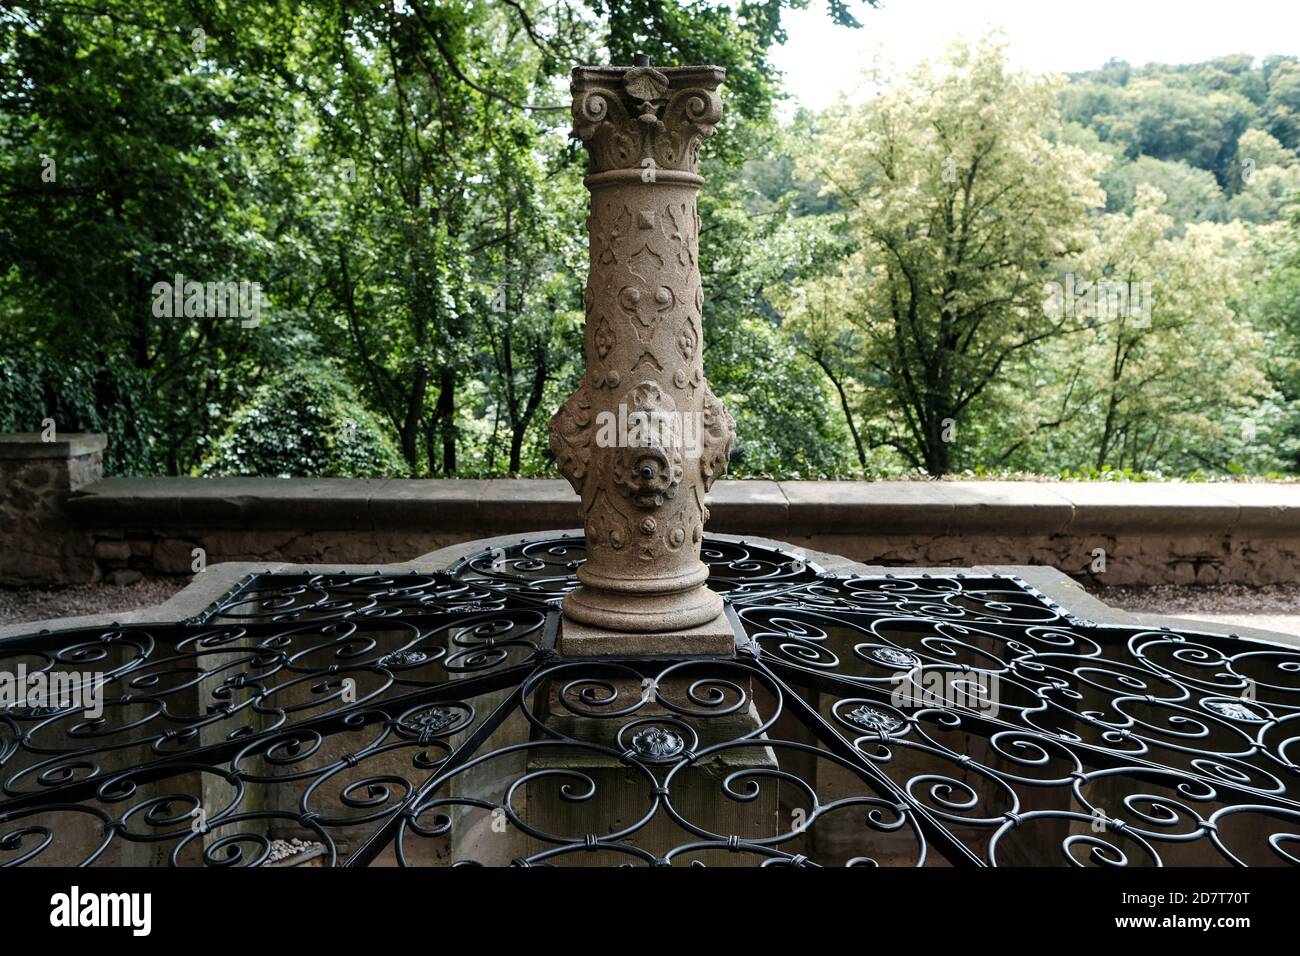 Walbrzych, Poland - 18 July 2020:  The fountain decorated with stucco, the Ksiaz Castle Museum Stock Photo